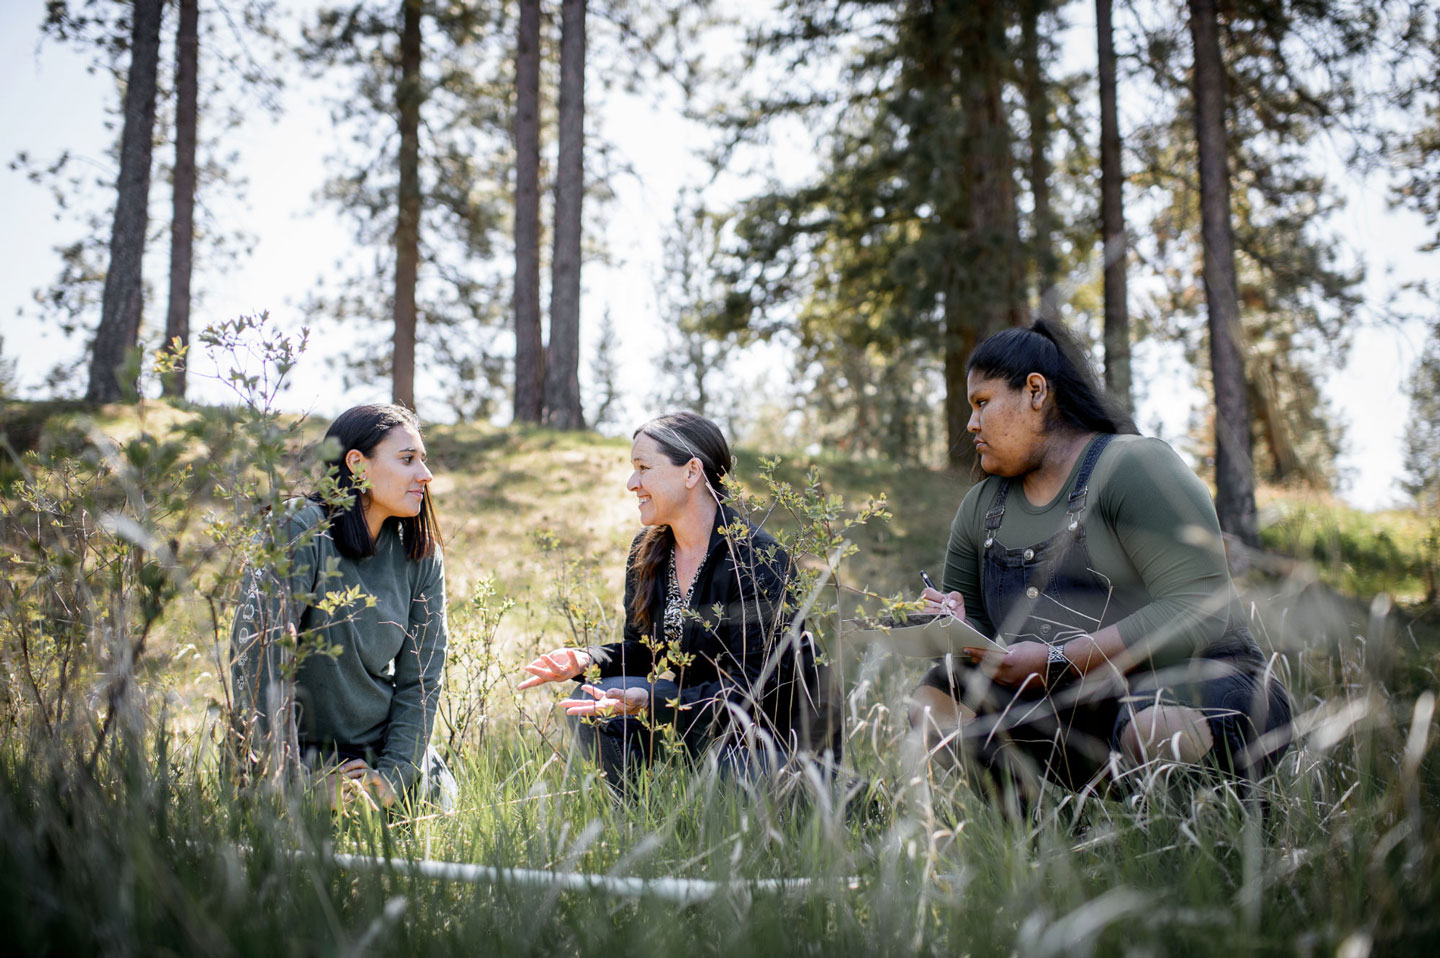 Three females sitting and talking in a forest.